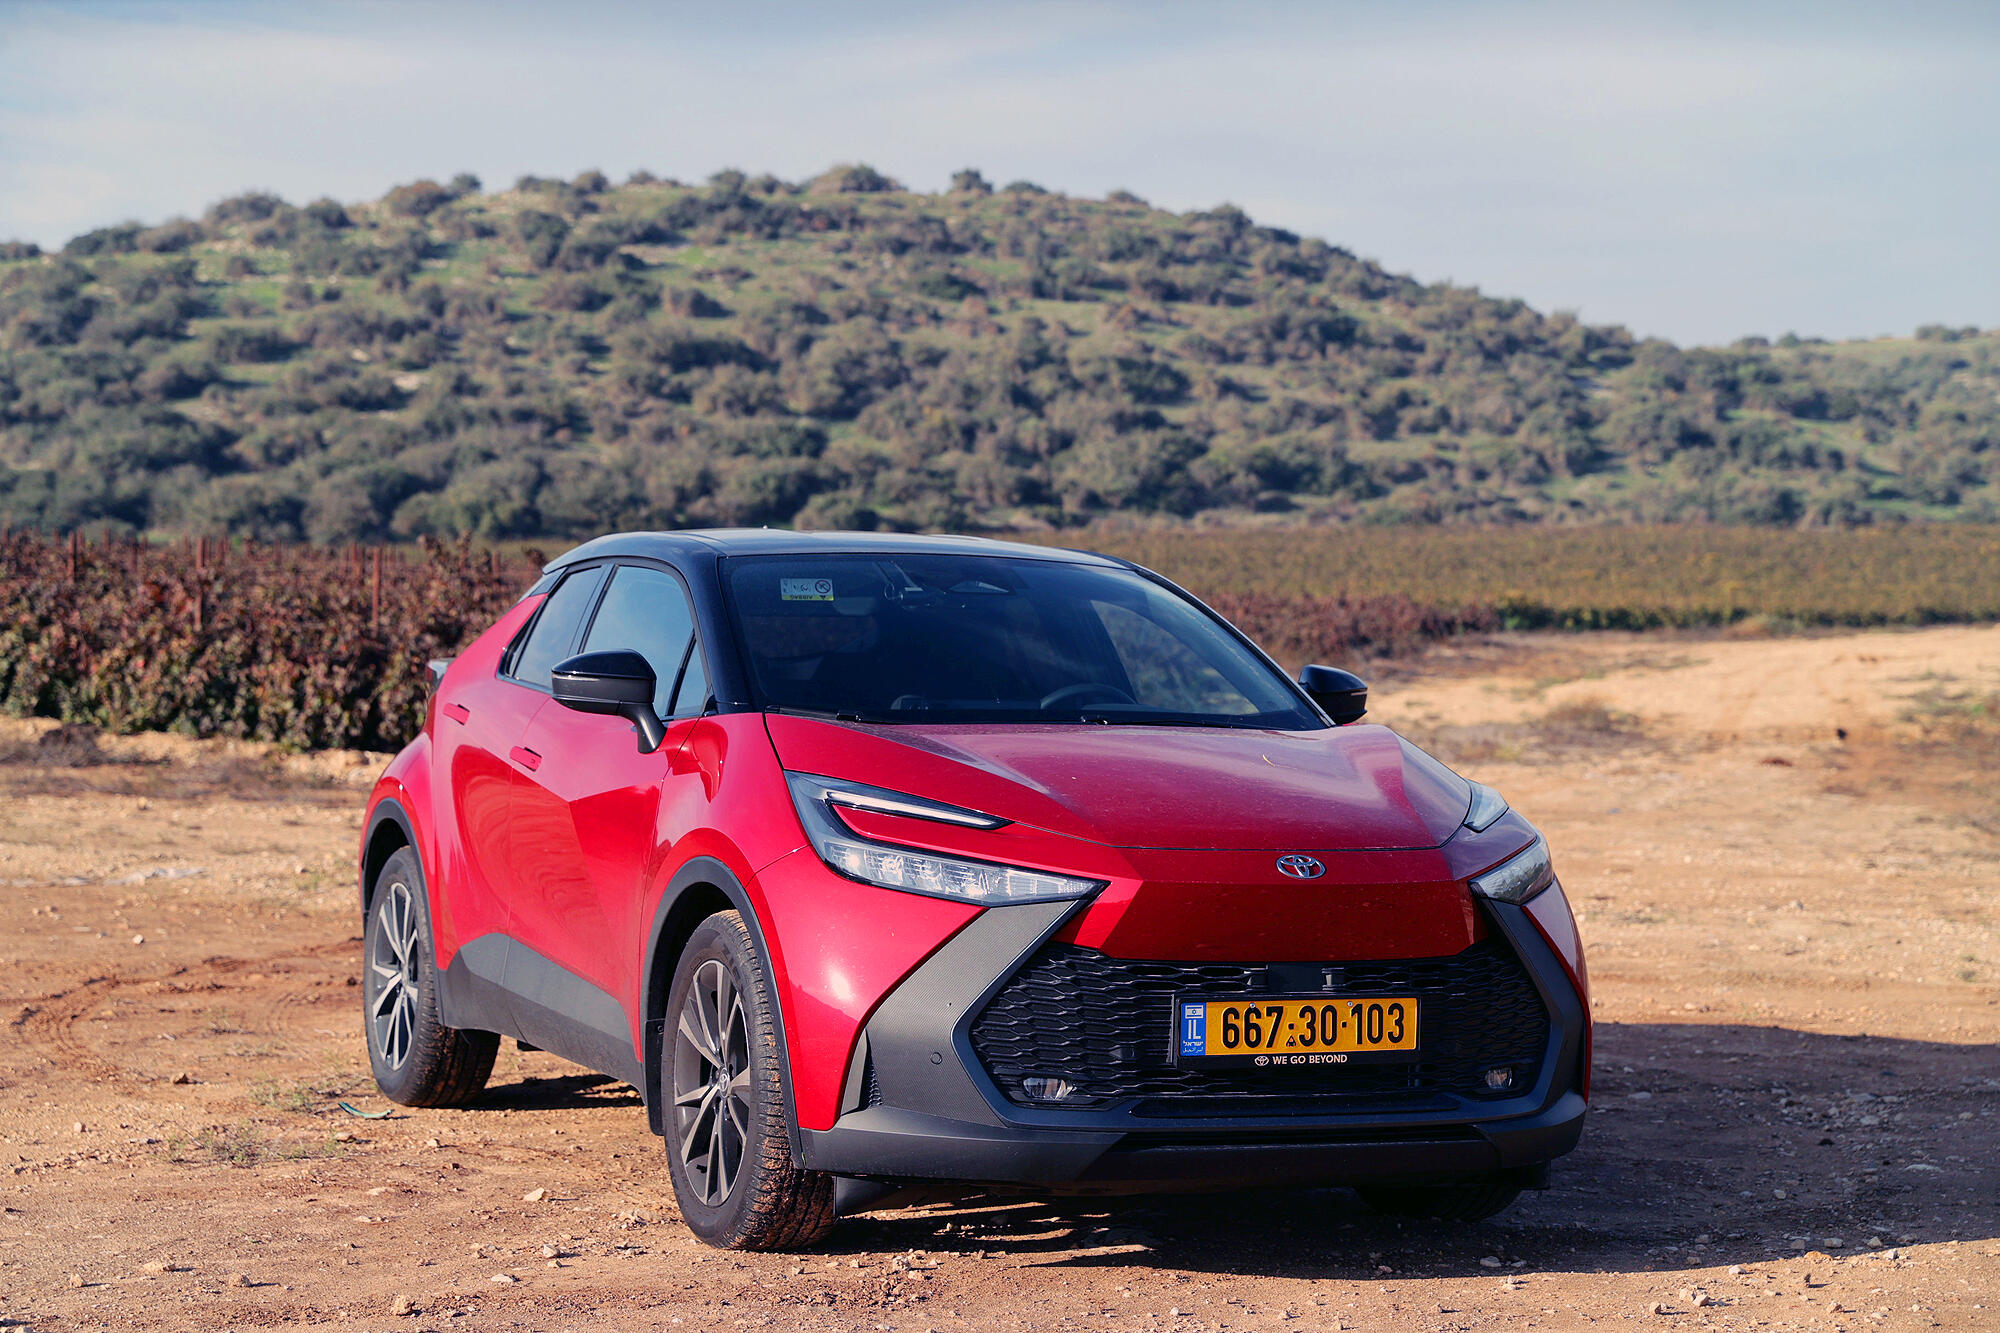 Toyota C-HR Carves Out Its Own Niche for 2020 with New Exterior Styling